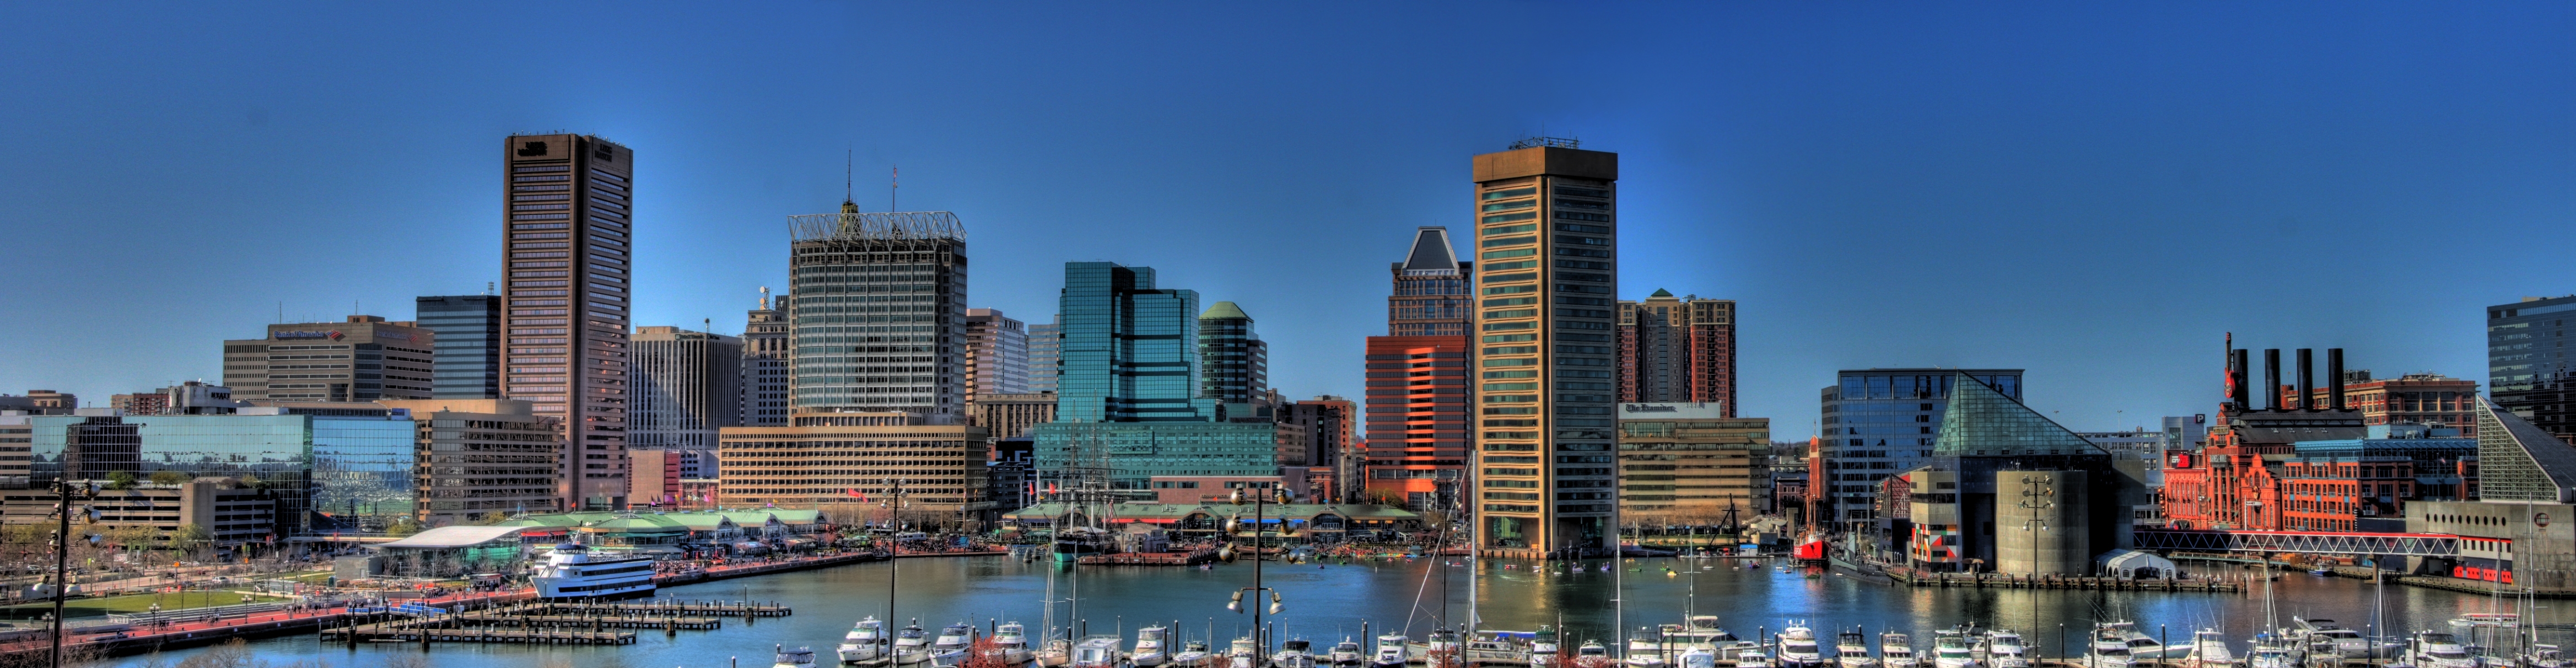 Popular Baltimore Image for Phone